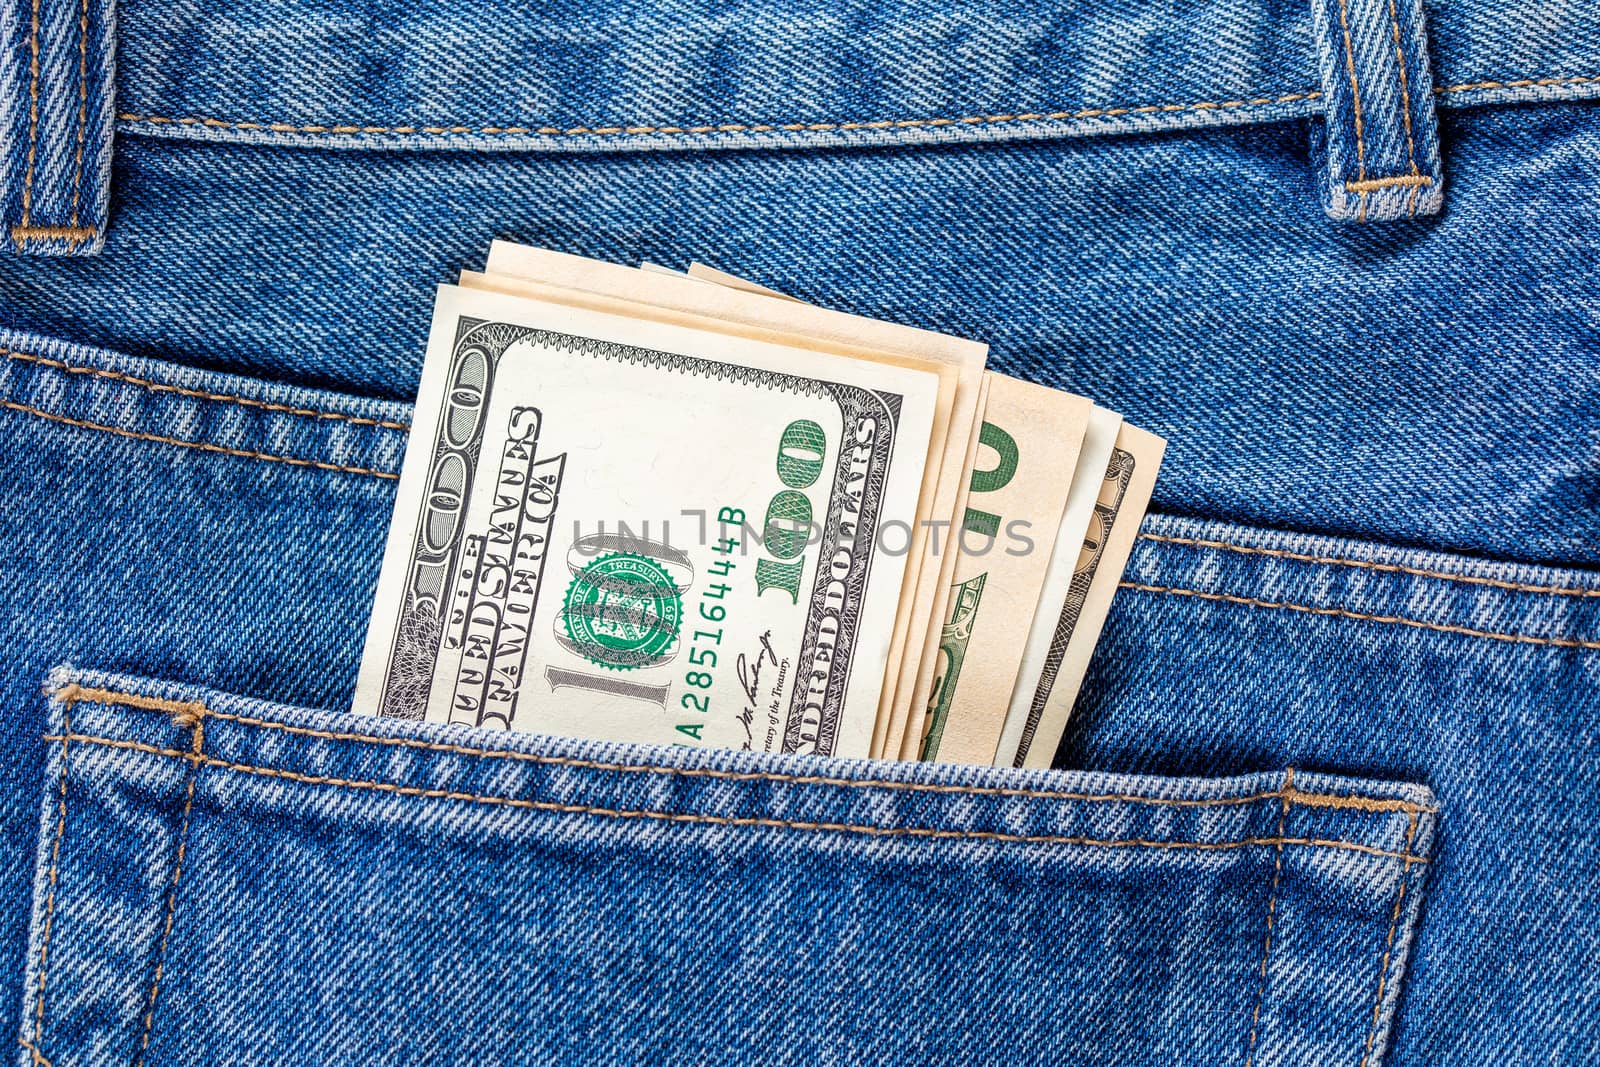 US dollar banknotes in the left rear pocket of blue jeans. Concept of saving money or pocket expenses by z1b